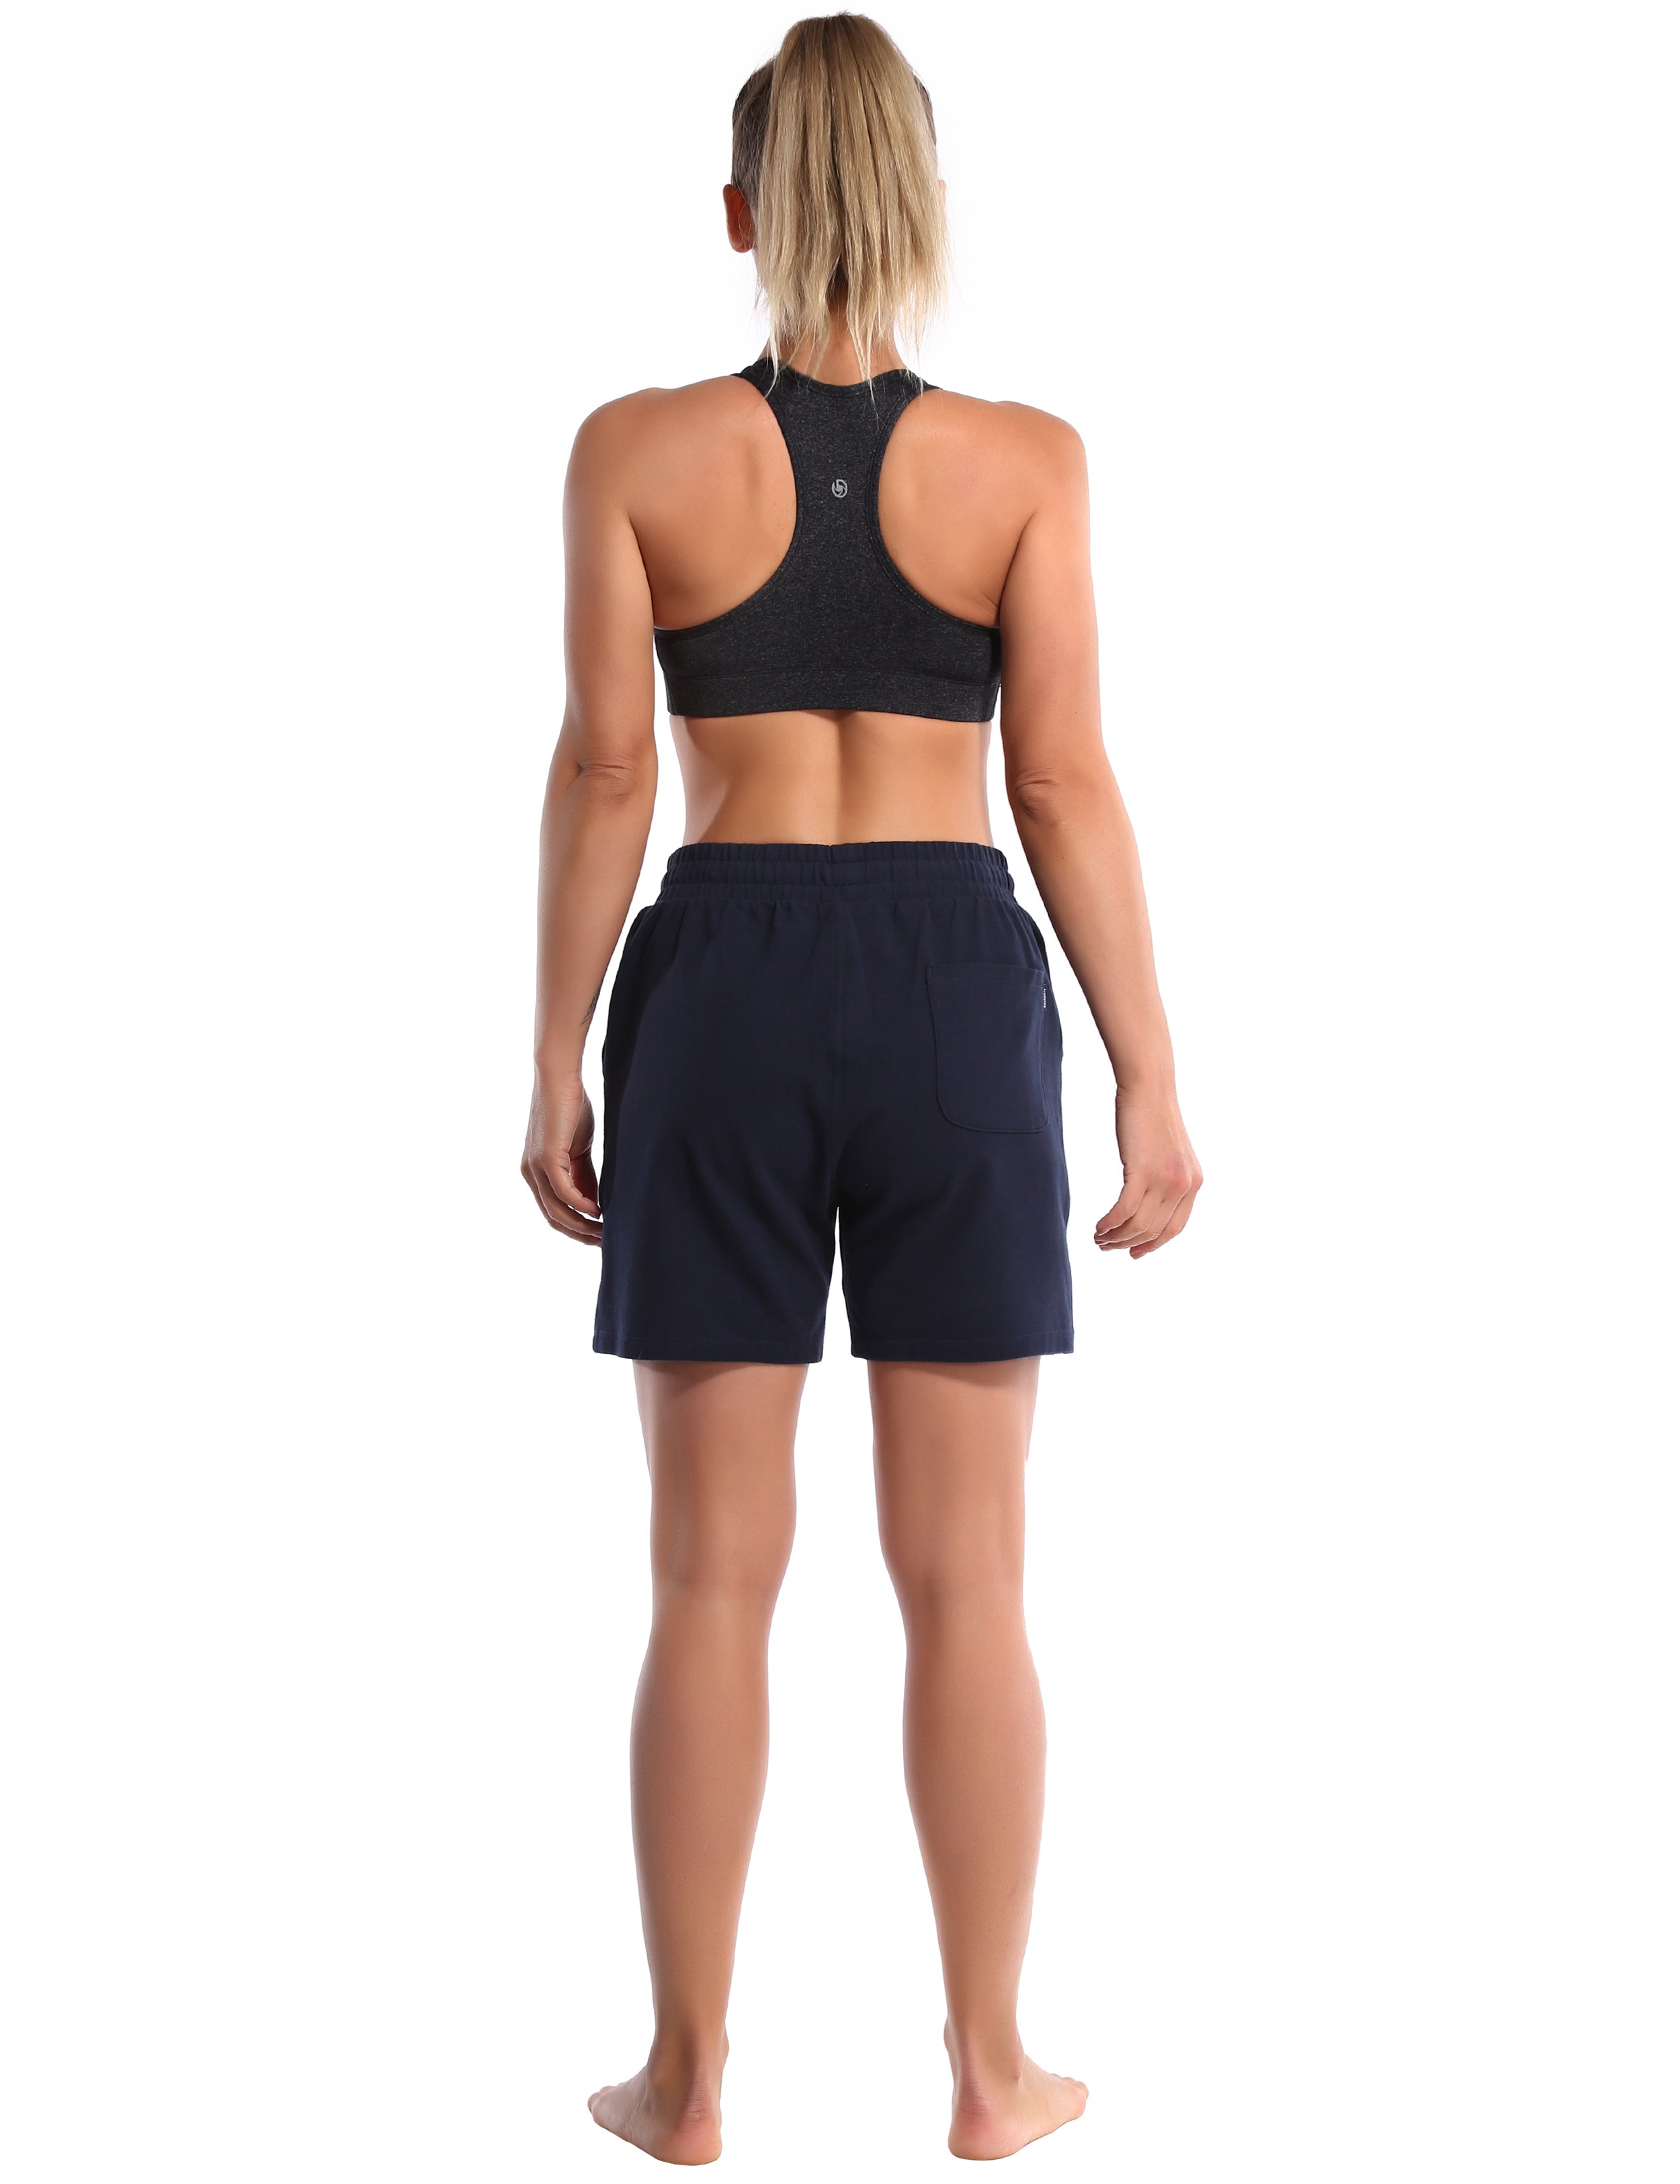 5" Joggers Shorts darknavy 90% Cotton, 10% Spandex Soft and Elastic Drawstring closure Lightweight & breathable fabric wicks away sweat to keep you comfortable Elastic waistband with internal drawcord for a snug, adjustable fit Big side pockets are available for 4.7", 5", 5.5" mobile phone Reflective logo helps you stand out in low light Perfect for any types of outdoor exercises and indoor fitness,like yoga,running,walking,jogging,lounging,workout,gym fitness,casual use,etc